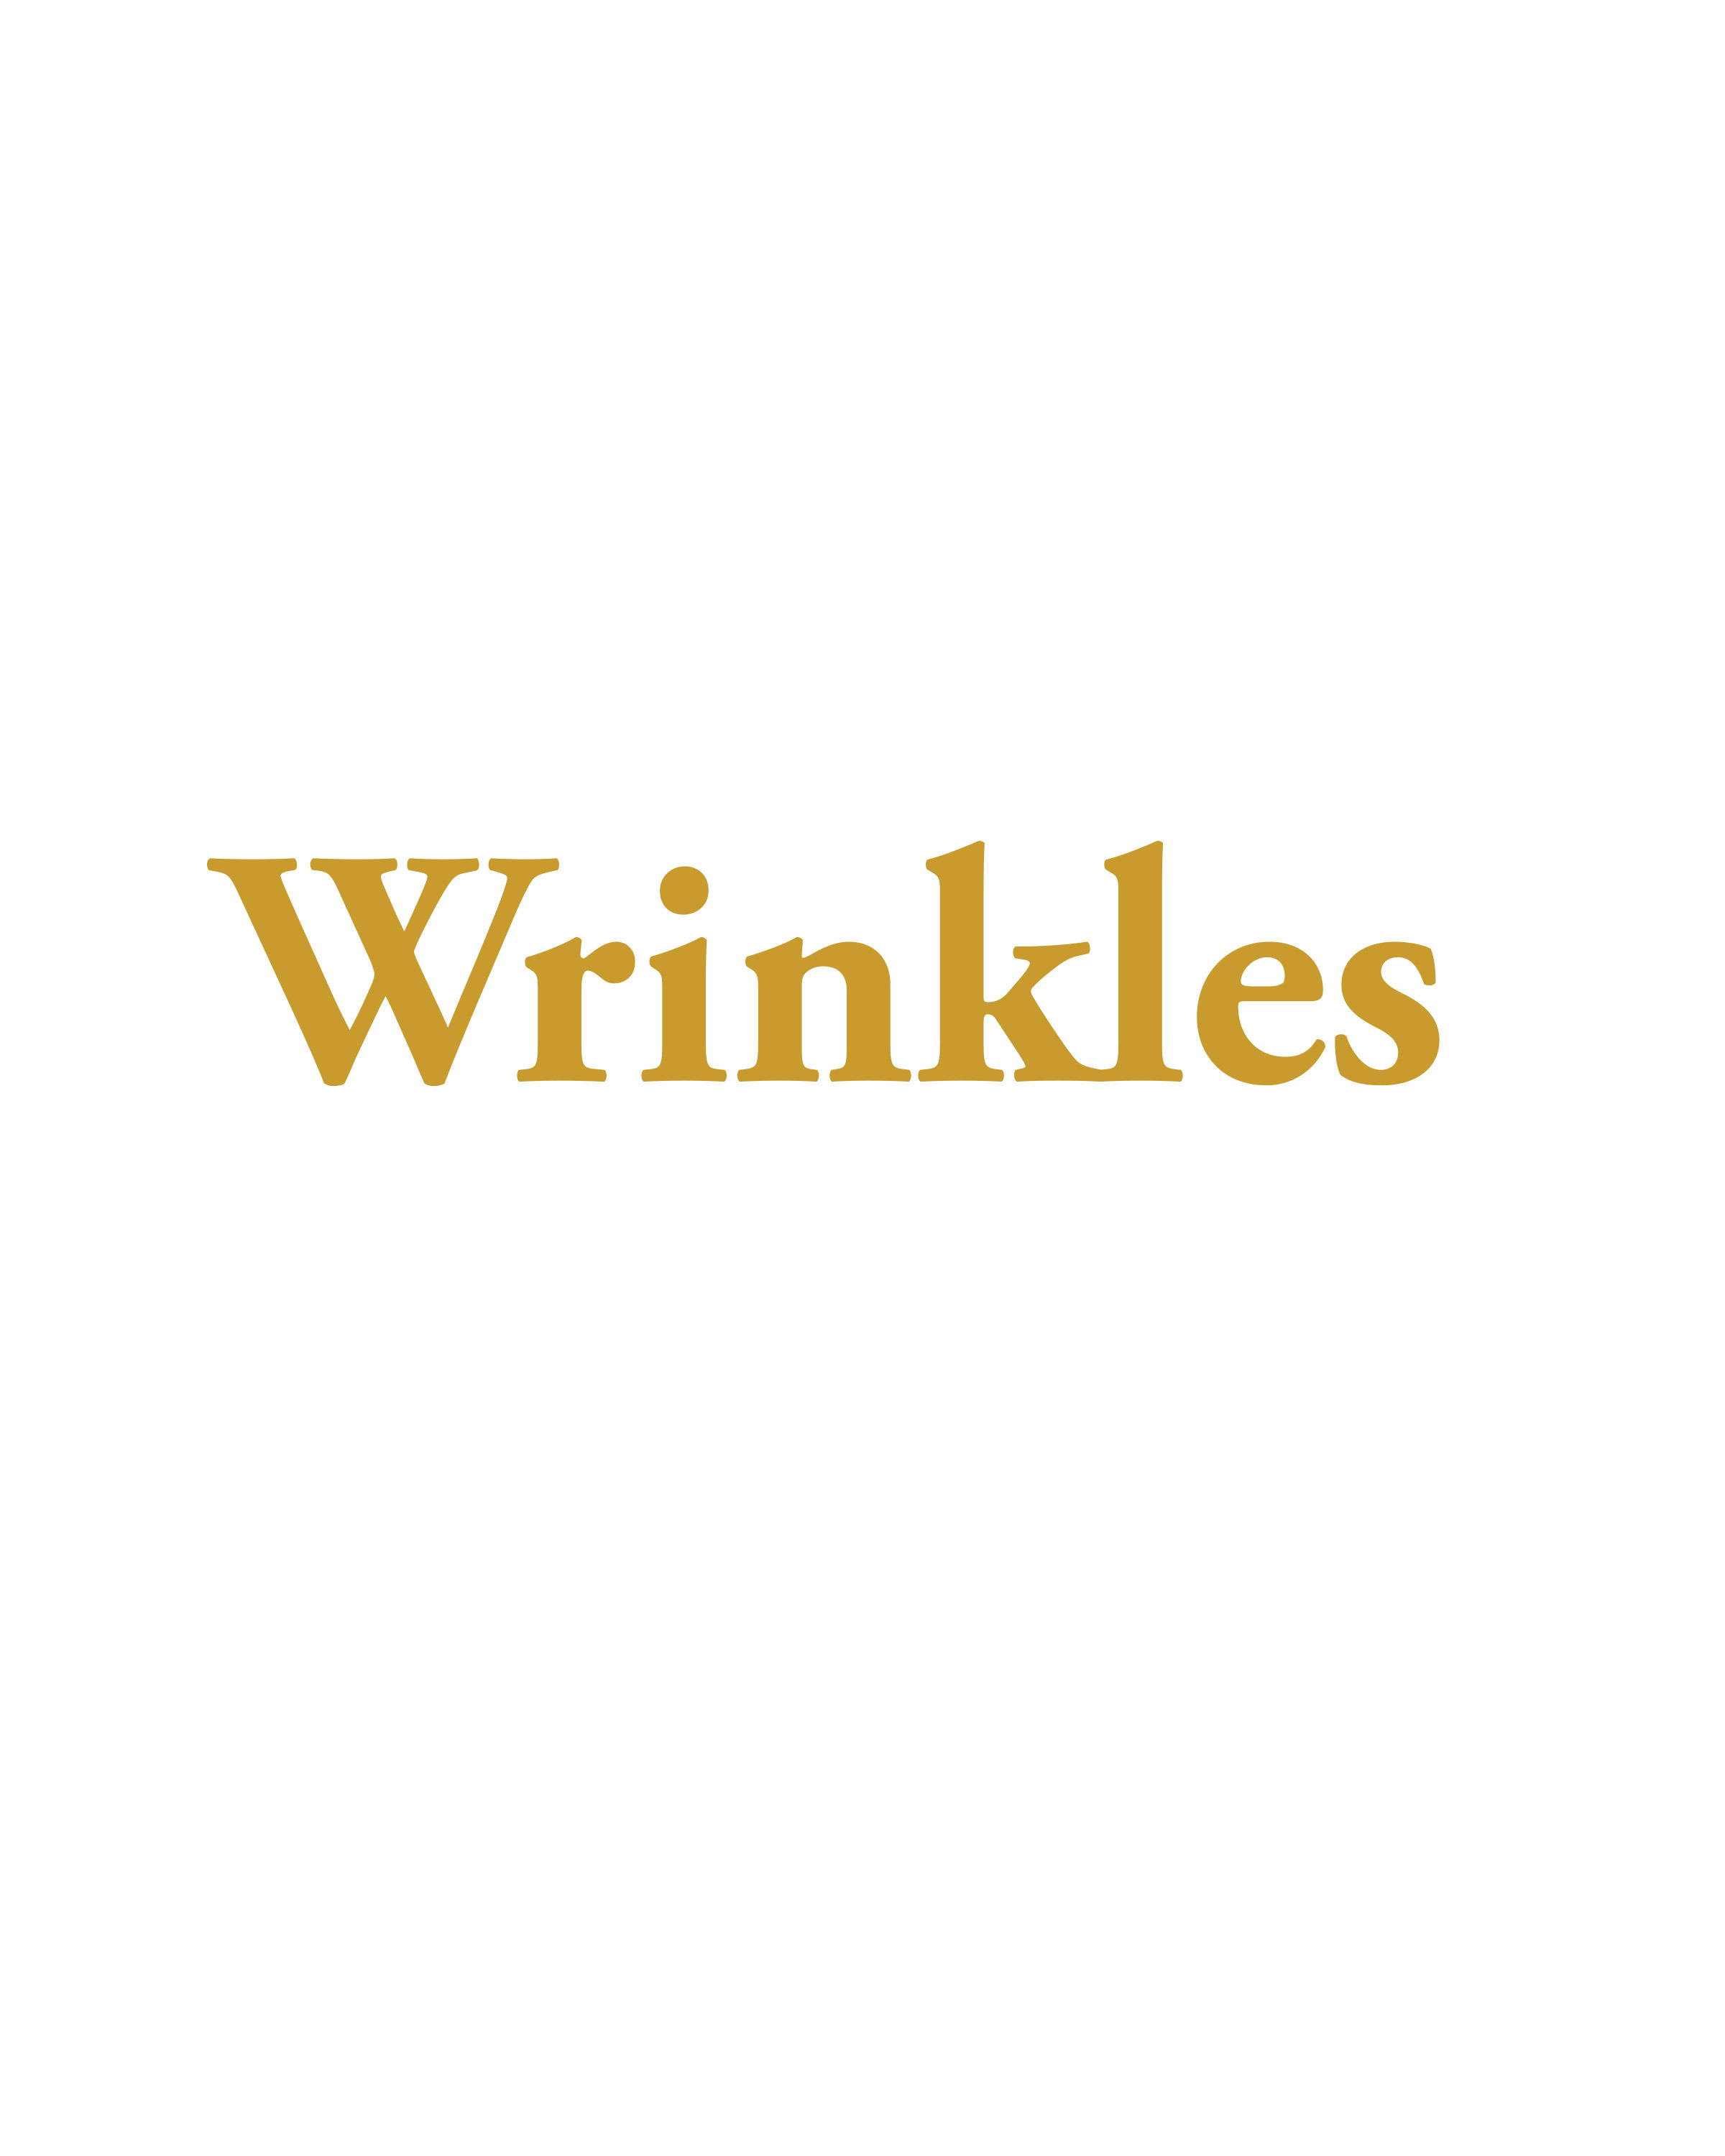 Read online Wrinkles comic -  Issue # TPB - 2